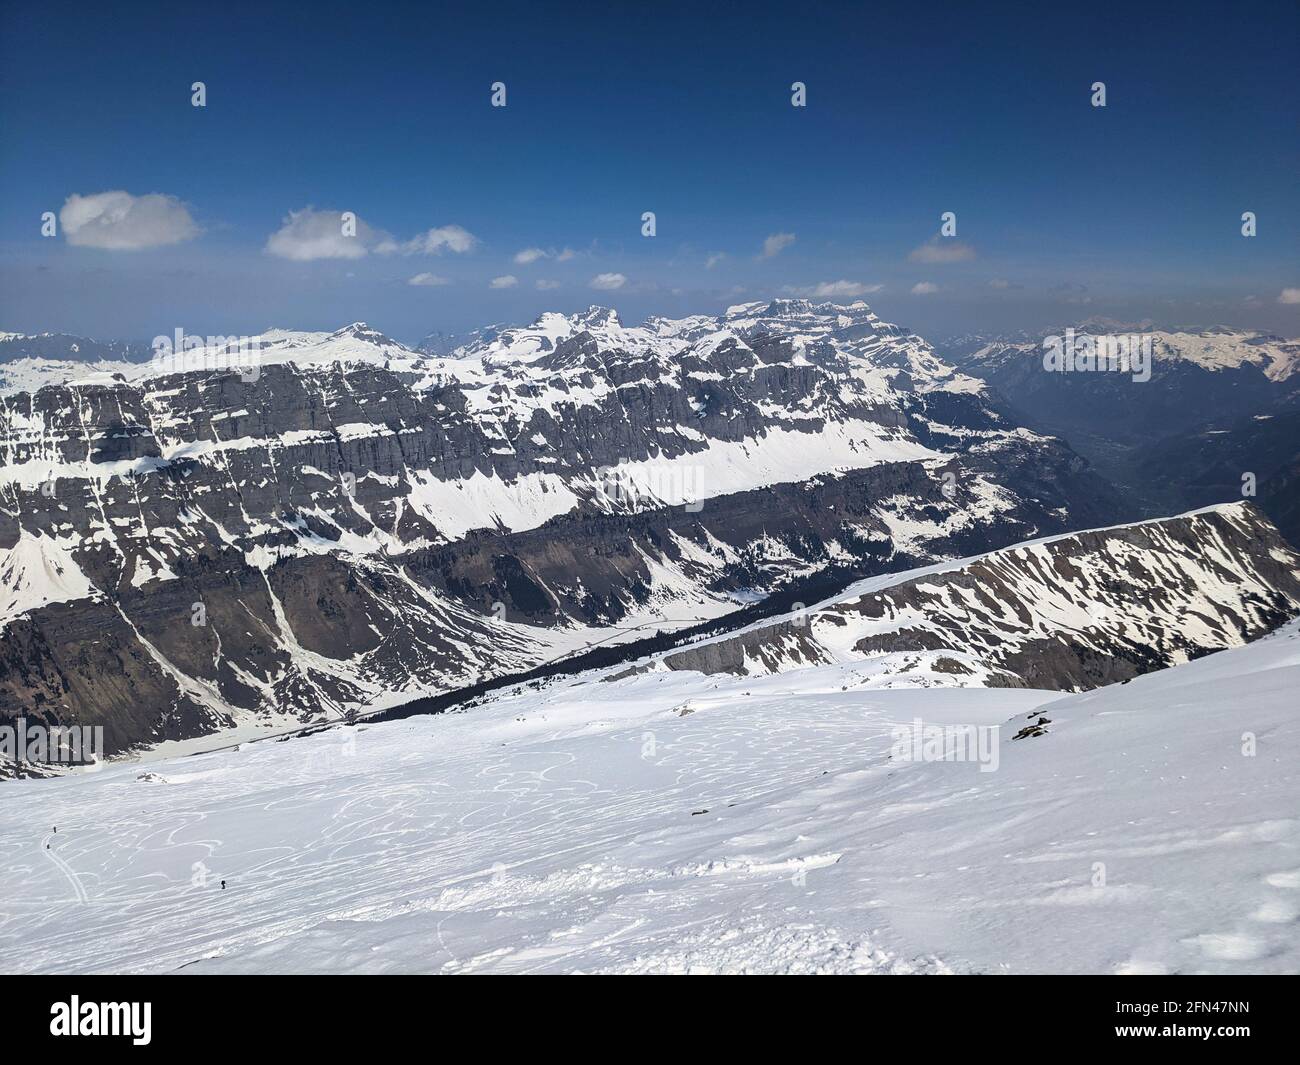 ski mountaineering swiss mountains with a fantastic view of the snowy mountains. Urnerboden piz russein ski freeride Stock Photo